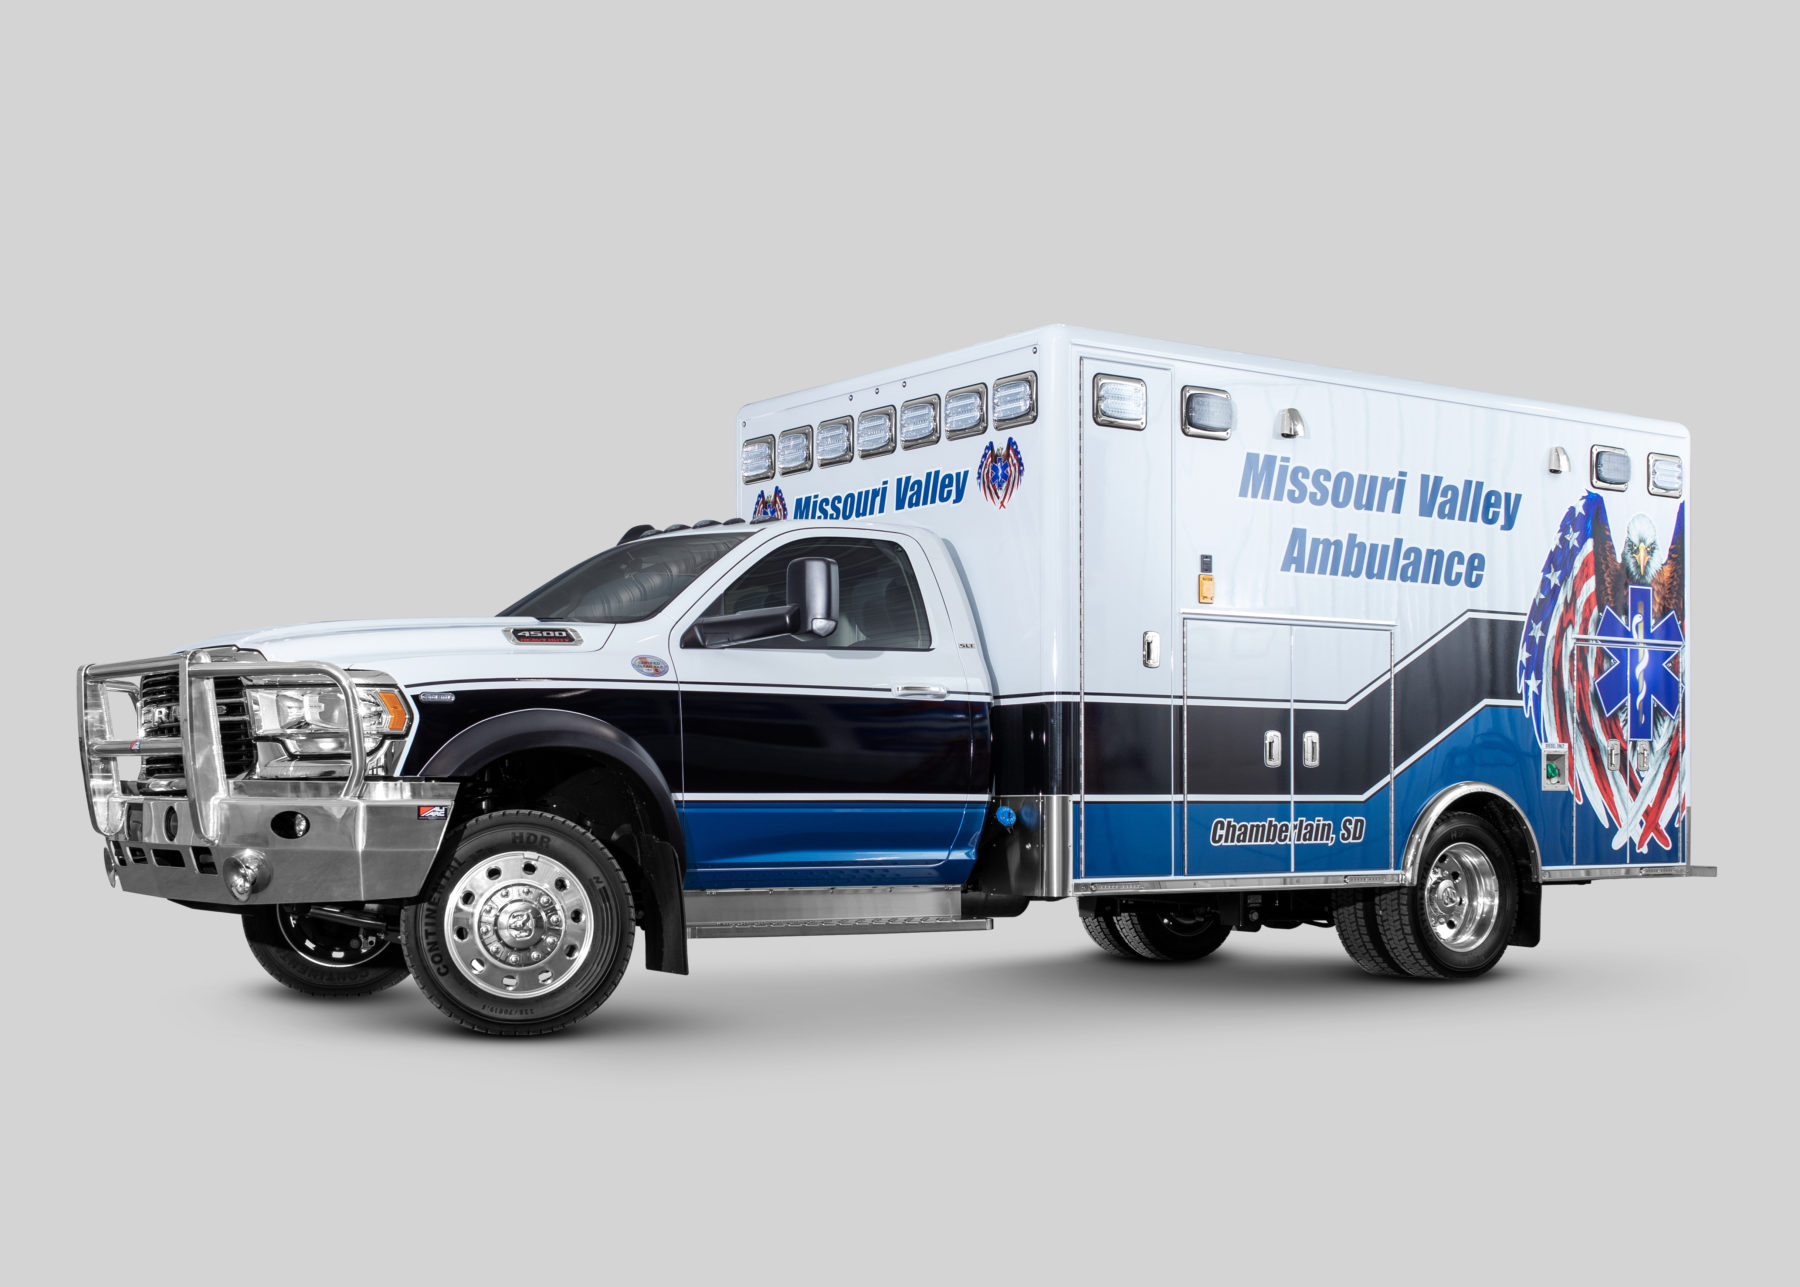 2019 Ram 4500 4x4 Heavy Duty Ambulance For Sale – Picture 1